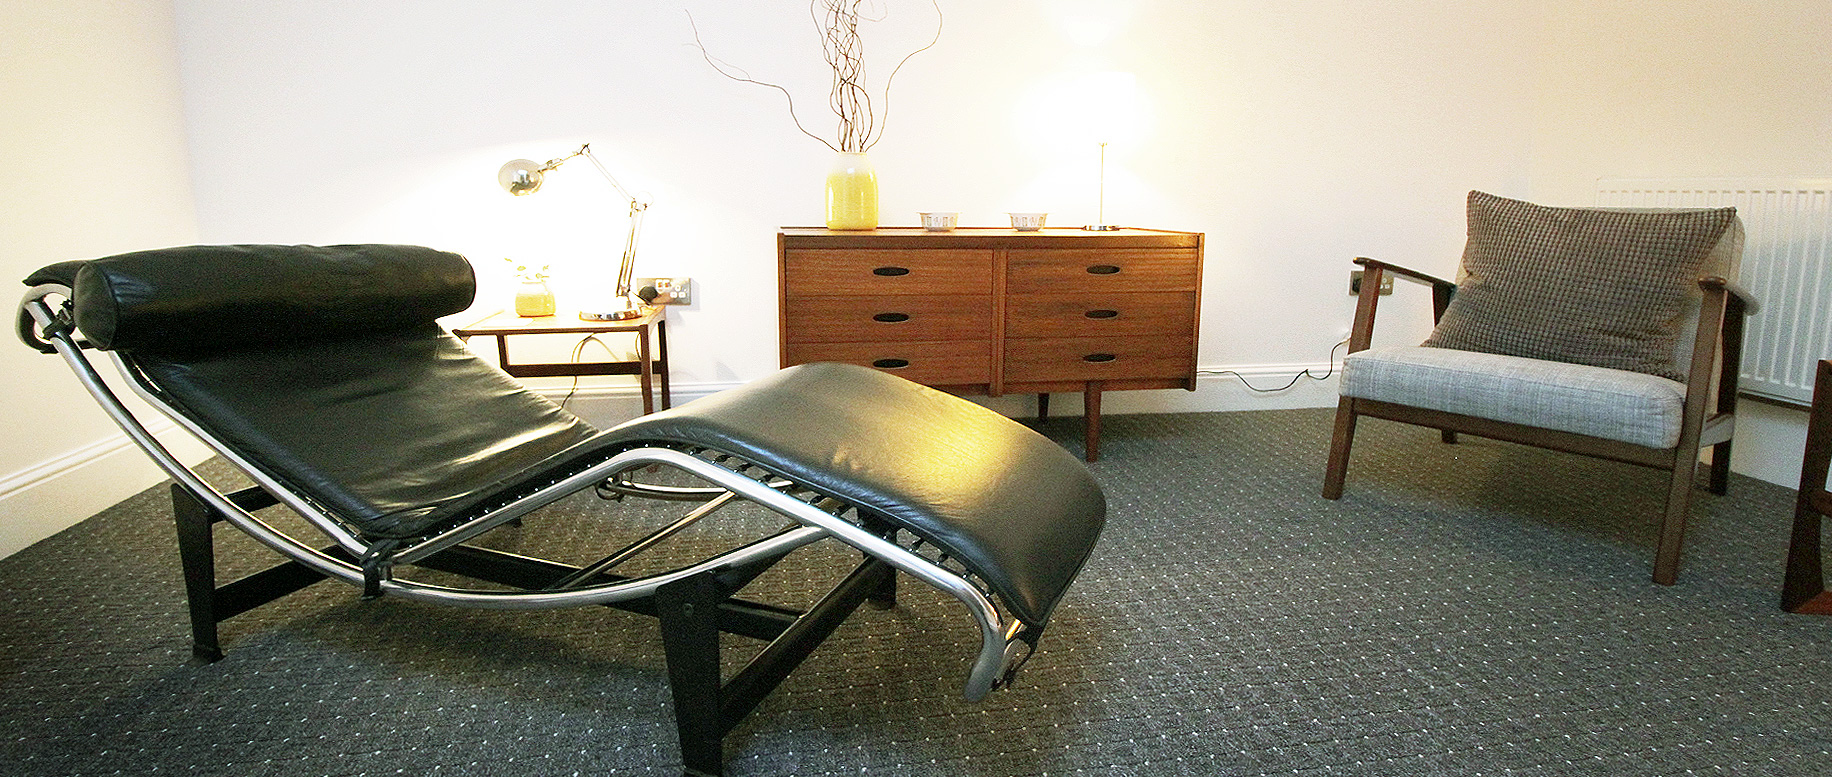 HQ Therapy Rooms Haggerston London E8 Consulting Room 9 with therapists couch